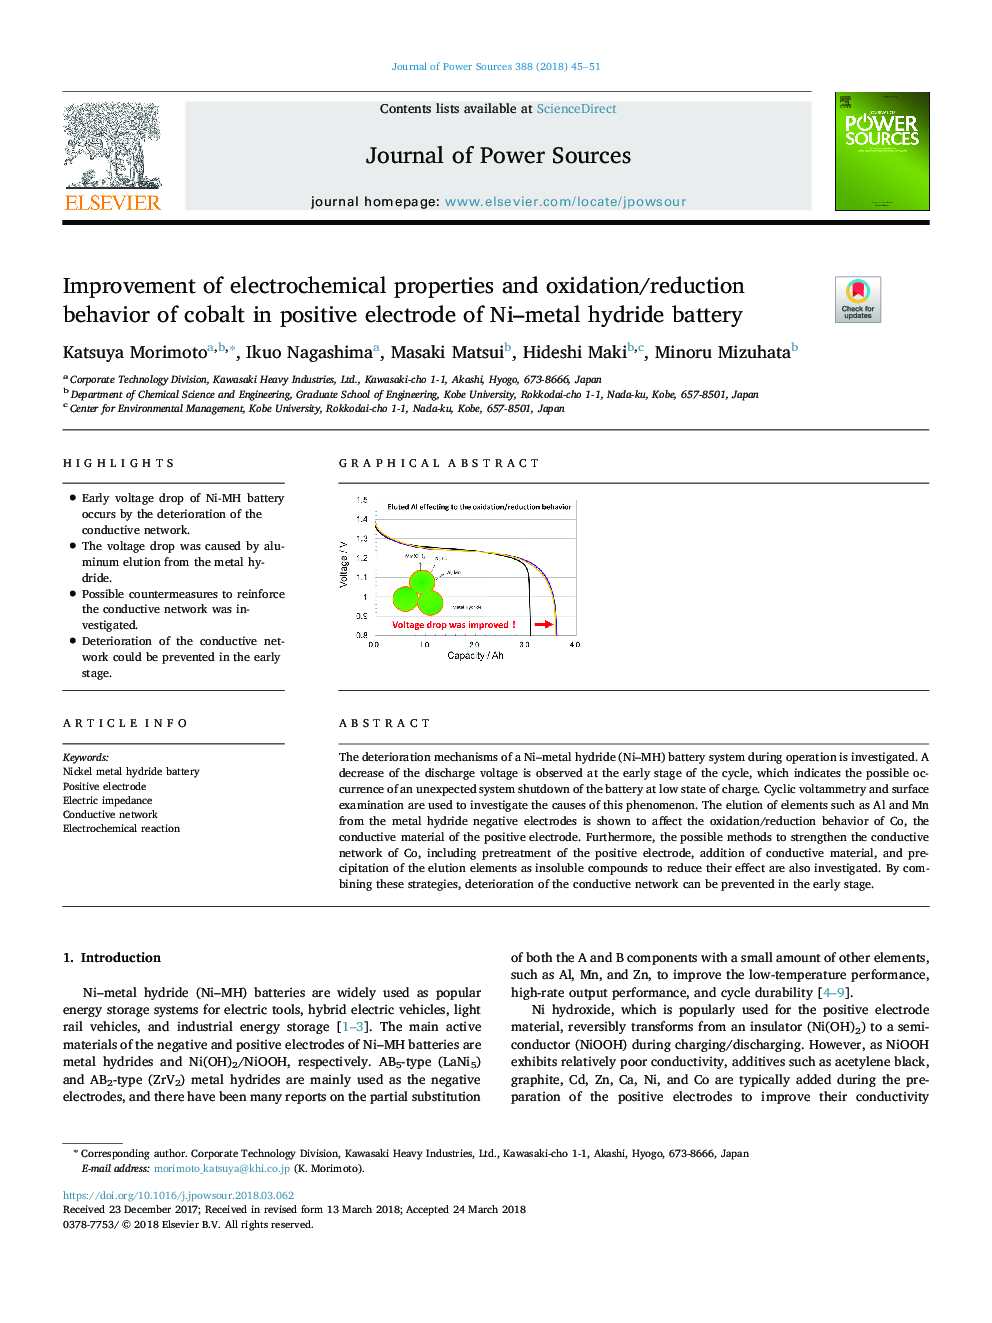 Improvement of electrochemical properties and oxidation/reduction behavior of cobalt in positive electrode of Ni-metal hydride battery